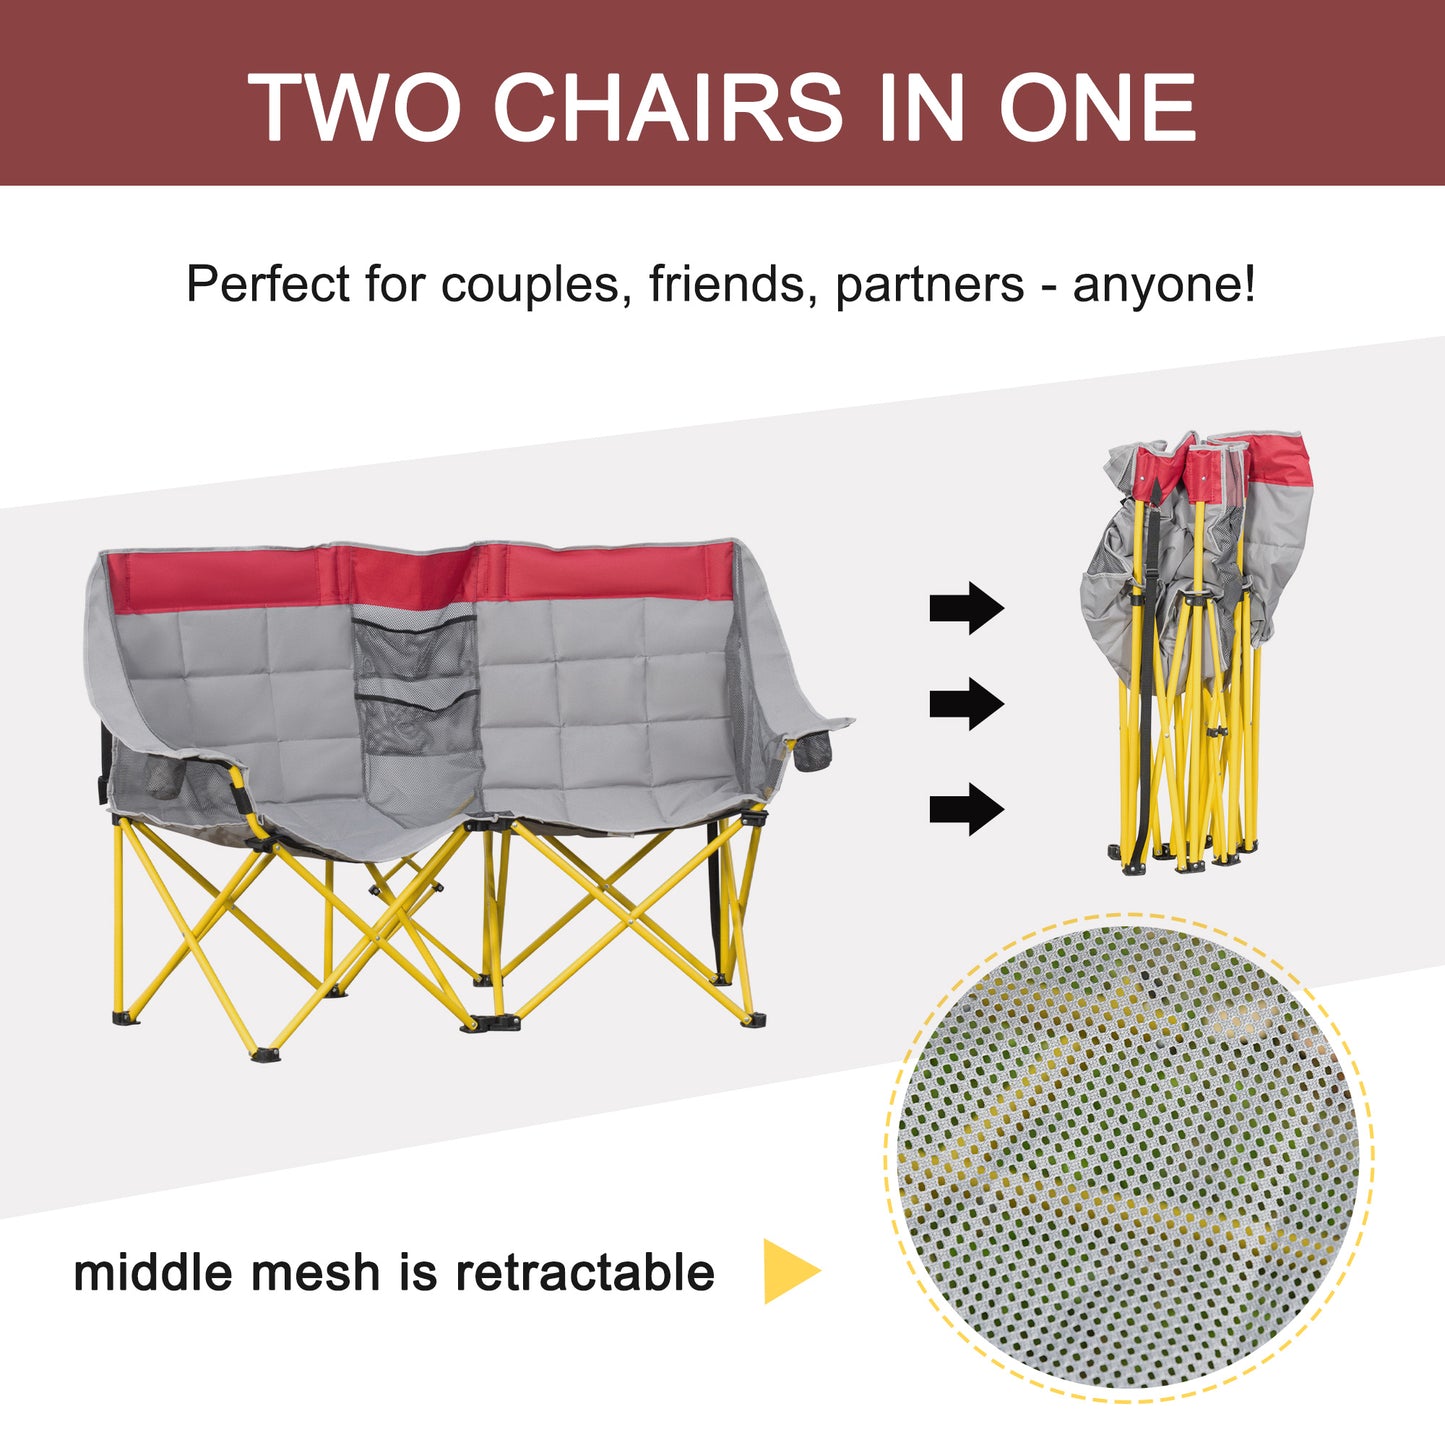 Double Seat Camping Chair Folding Lawn Loveseat w/ Storage Pocket &; Cup Holder Compact and Sturdy in a Bag for Outdoor, Beach, Picnic, Hiking, Travel, Red - Gallery Canada